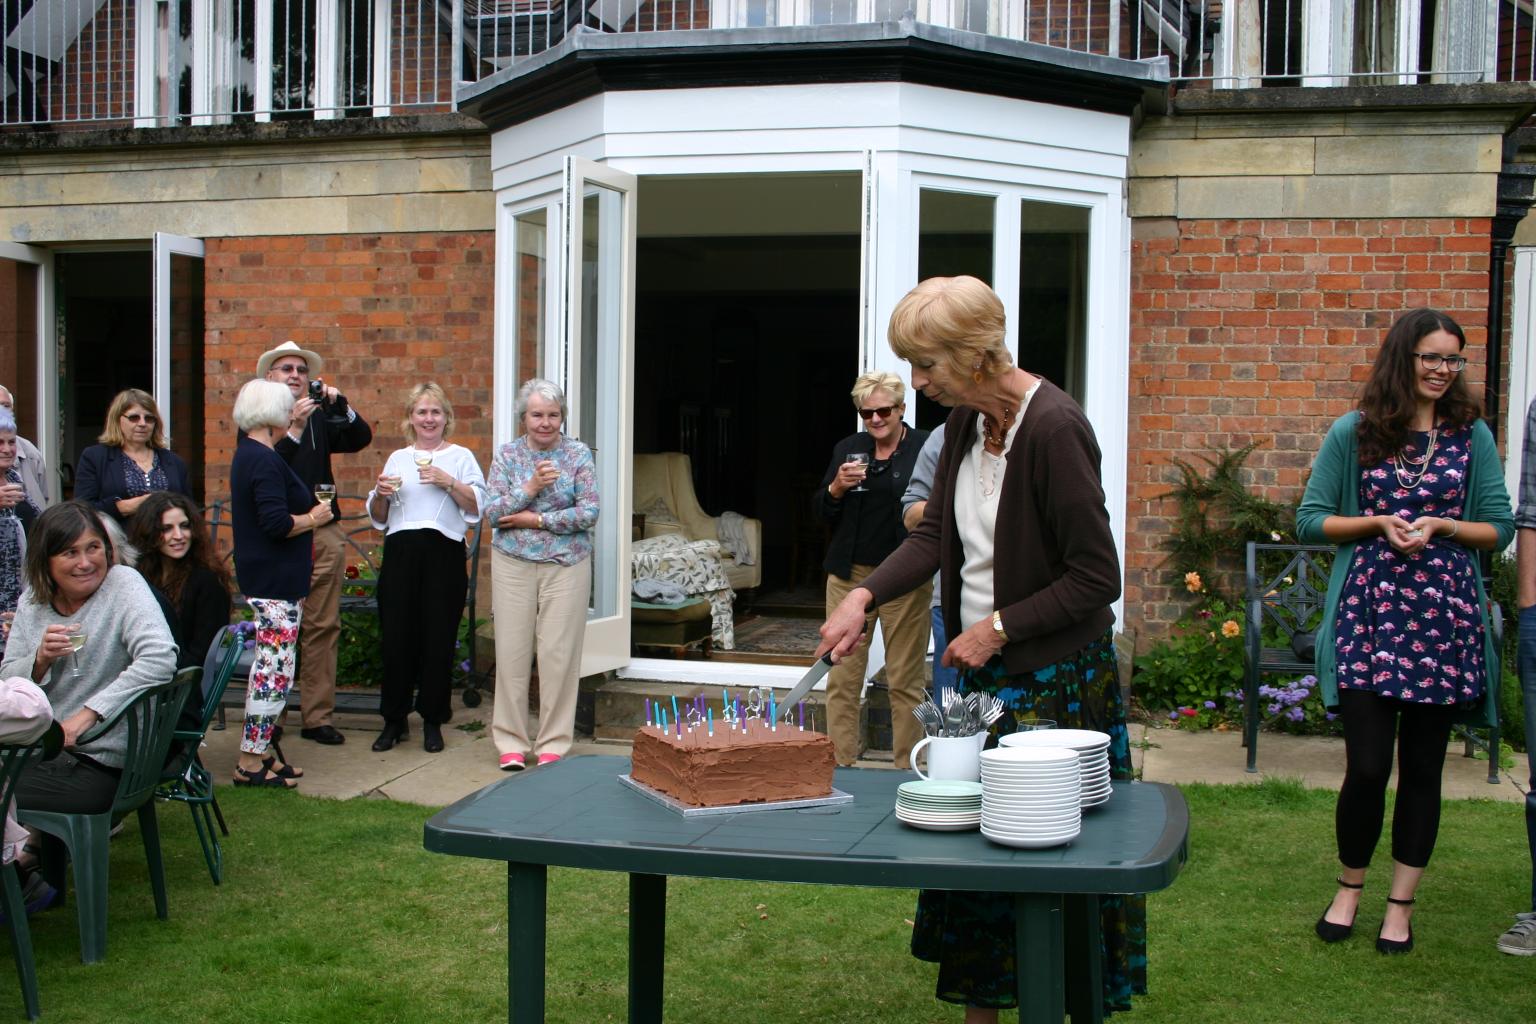 Saturday 23rd August, cutting the cake!